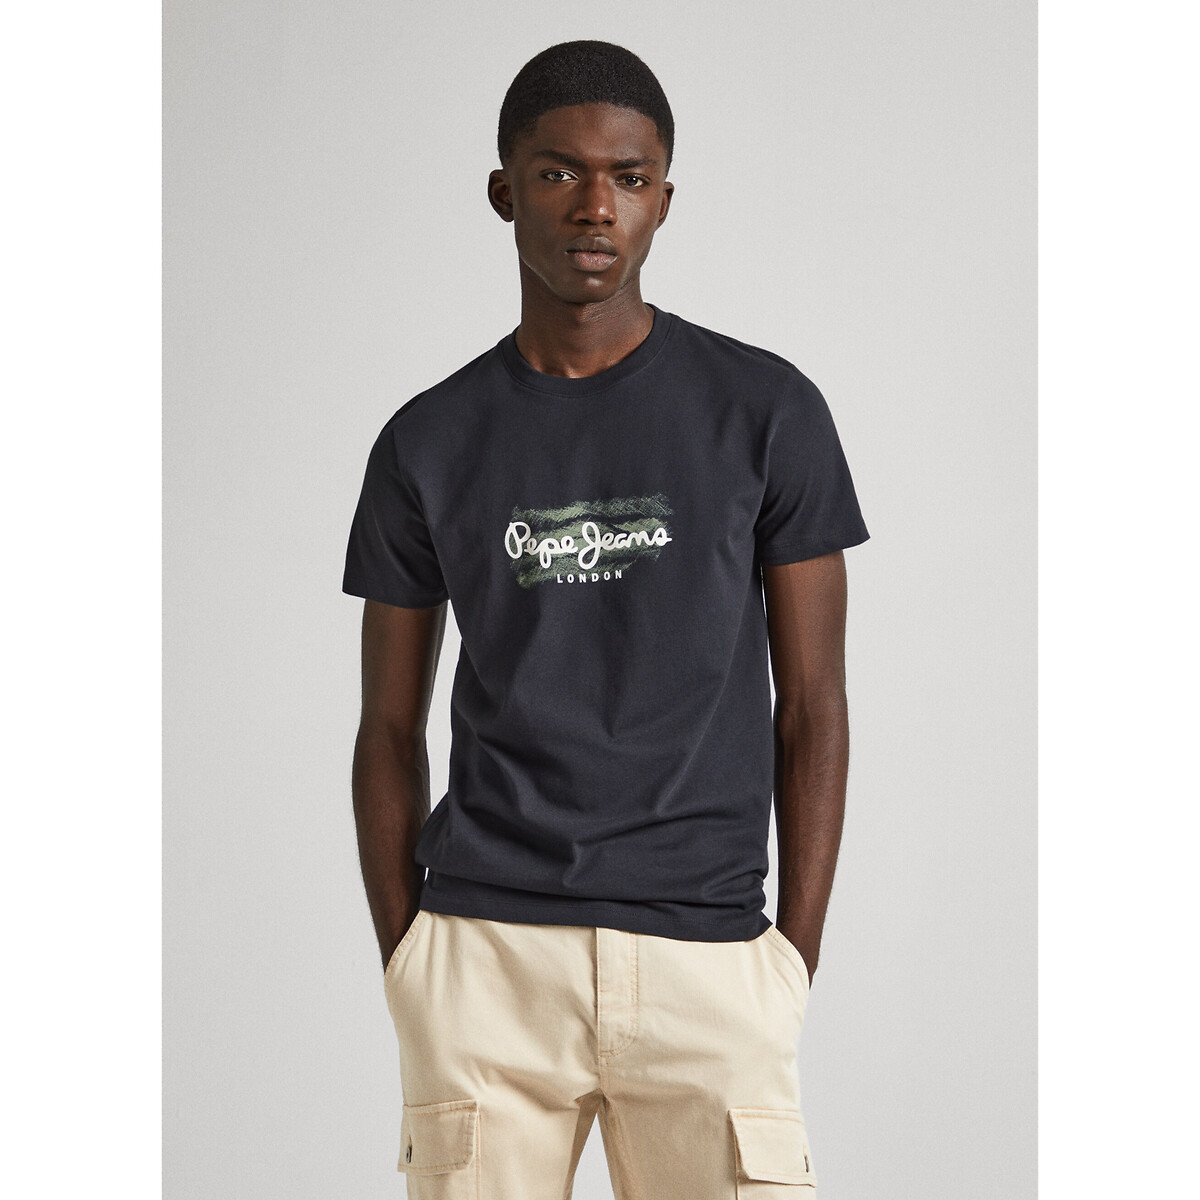 Buy Pepe Jeans Black Maddox Allover Printed T-Shirt online